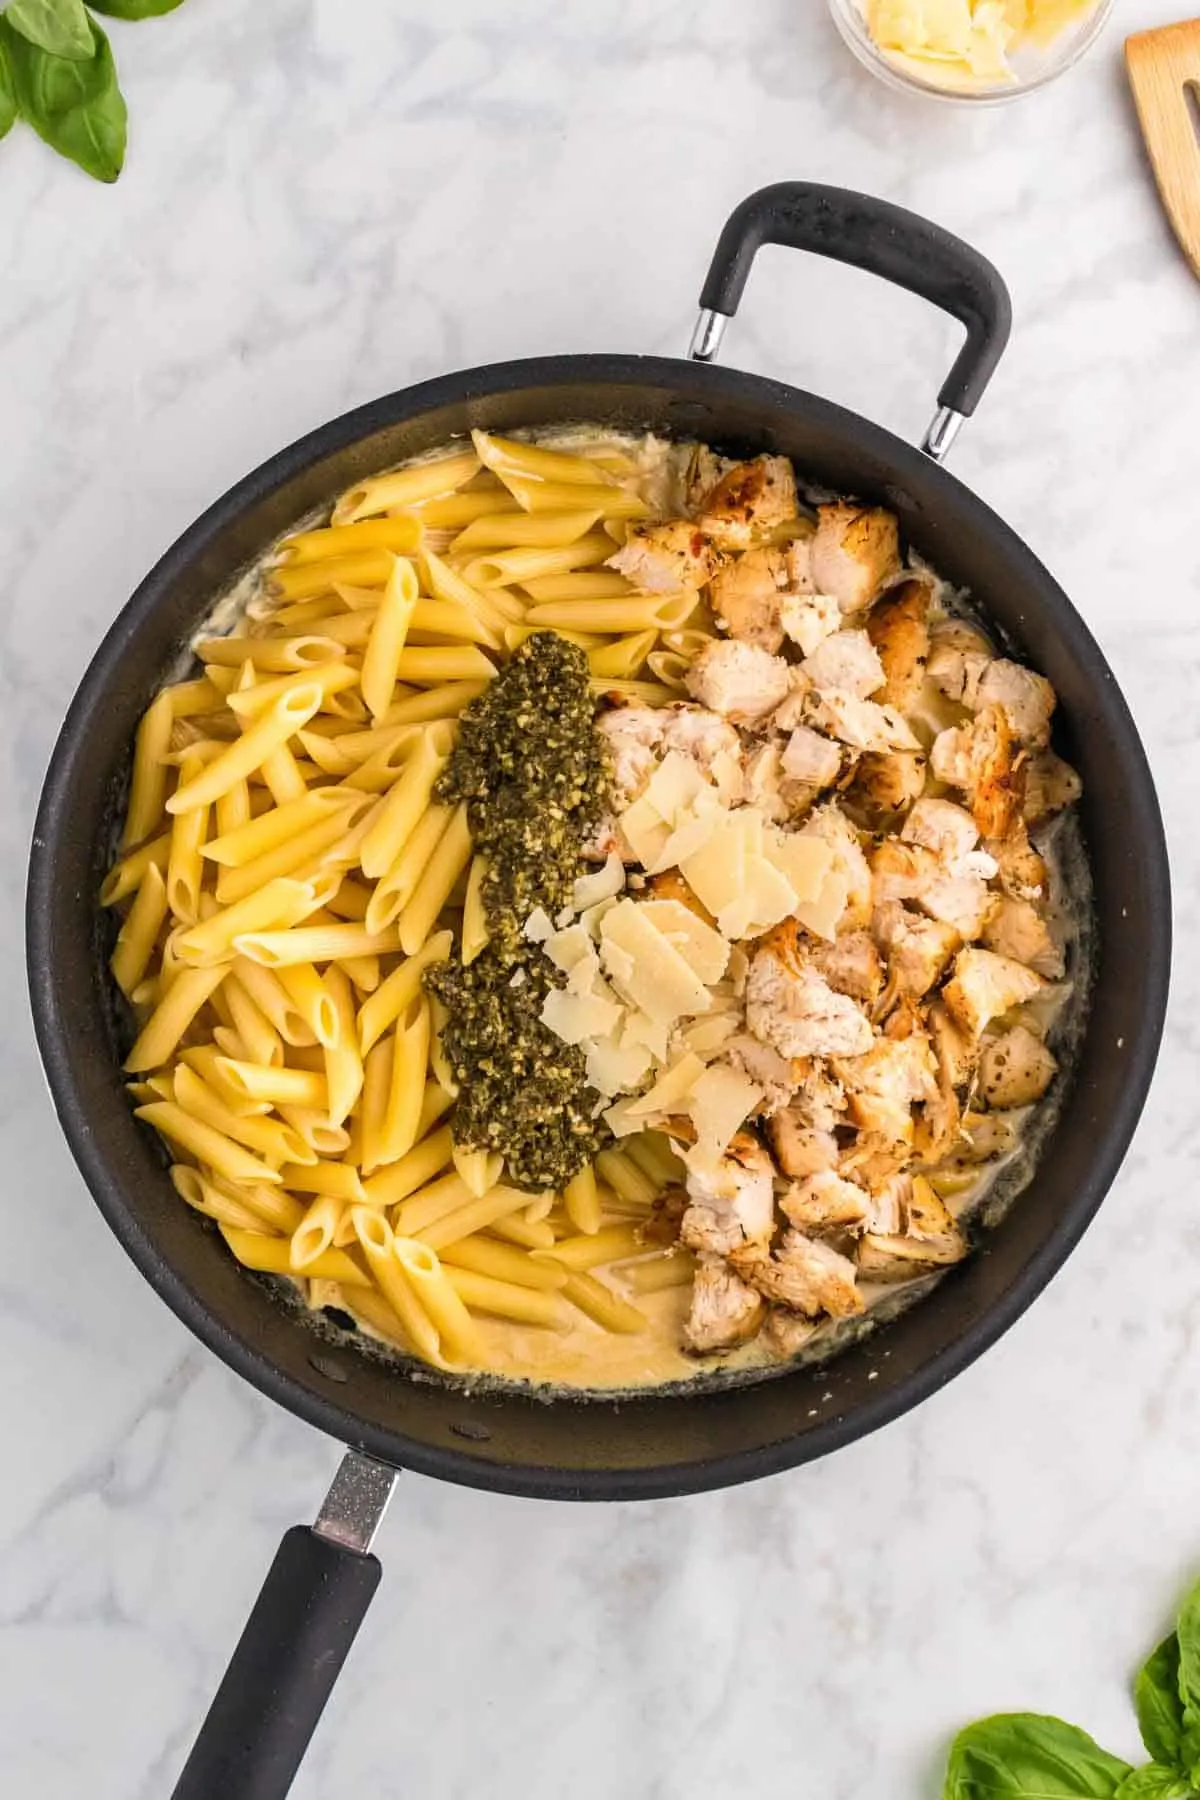 cooked penne, basil pesto, parmesan cheese and cooked sliced chicken breast pieces added to skillet